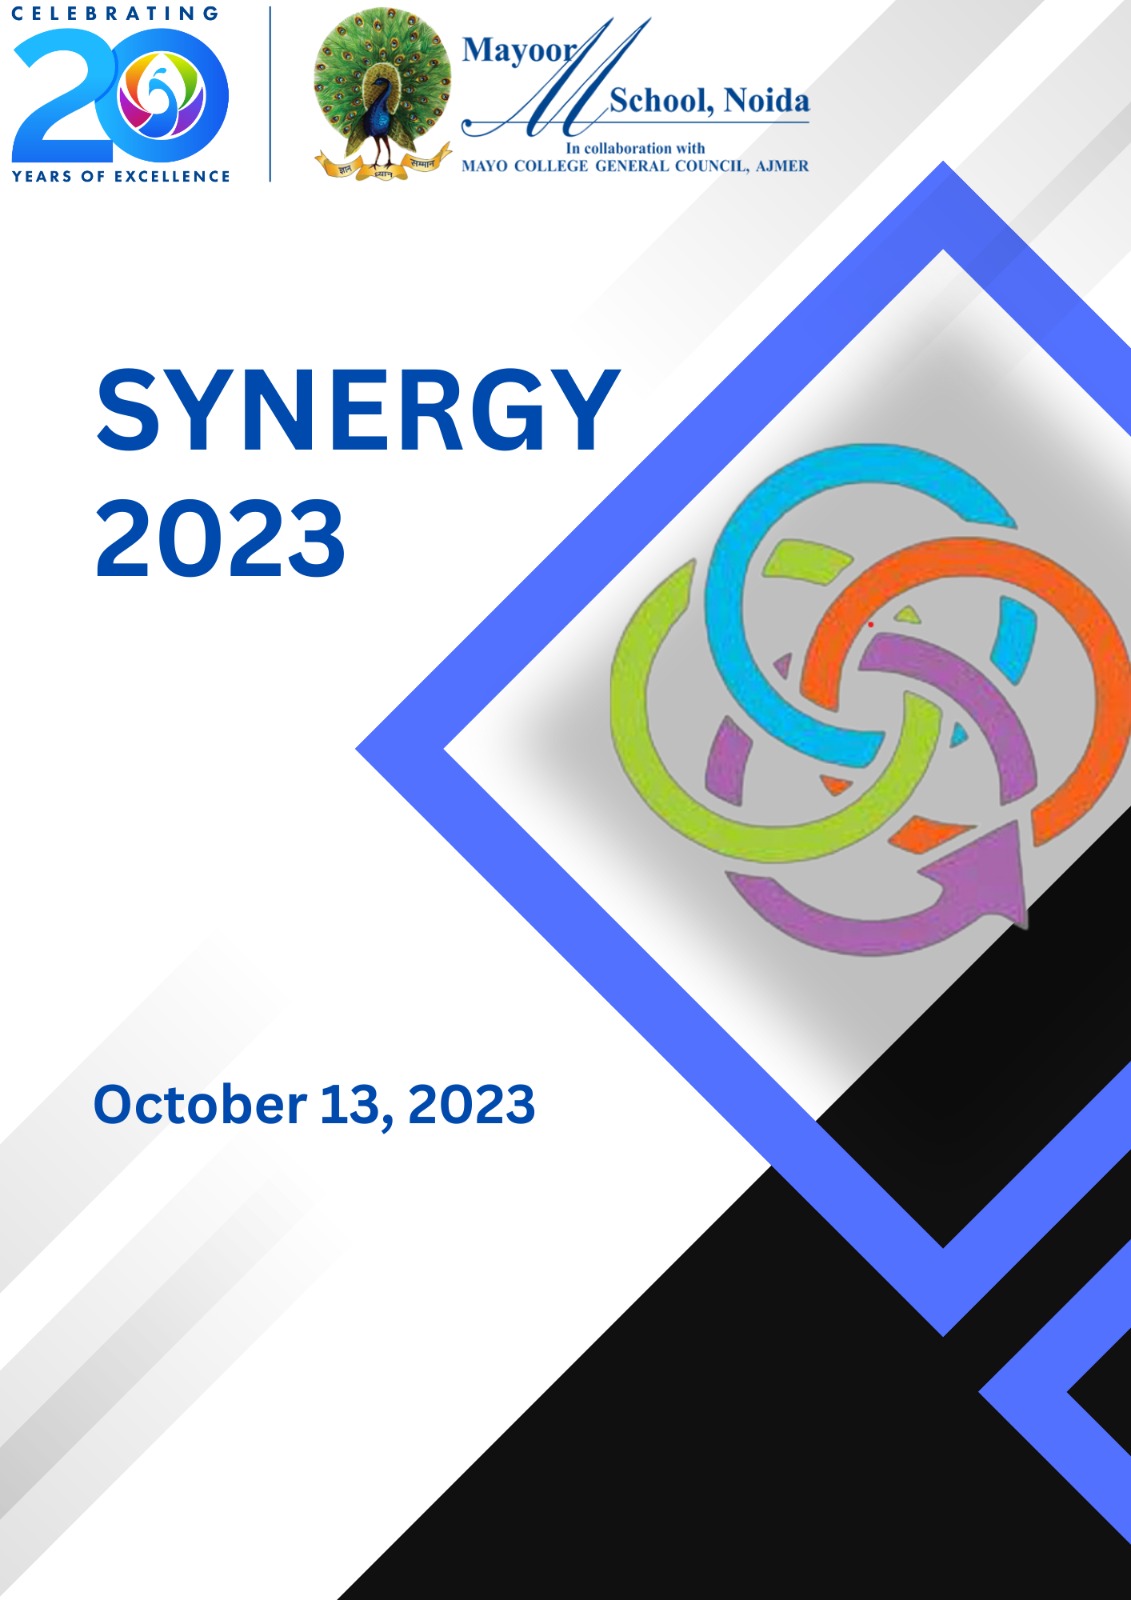 SYNERGY 2023 SPECTACLE OF ARTISTRY AND UNITY